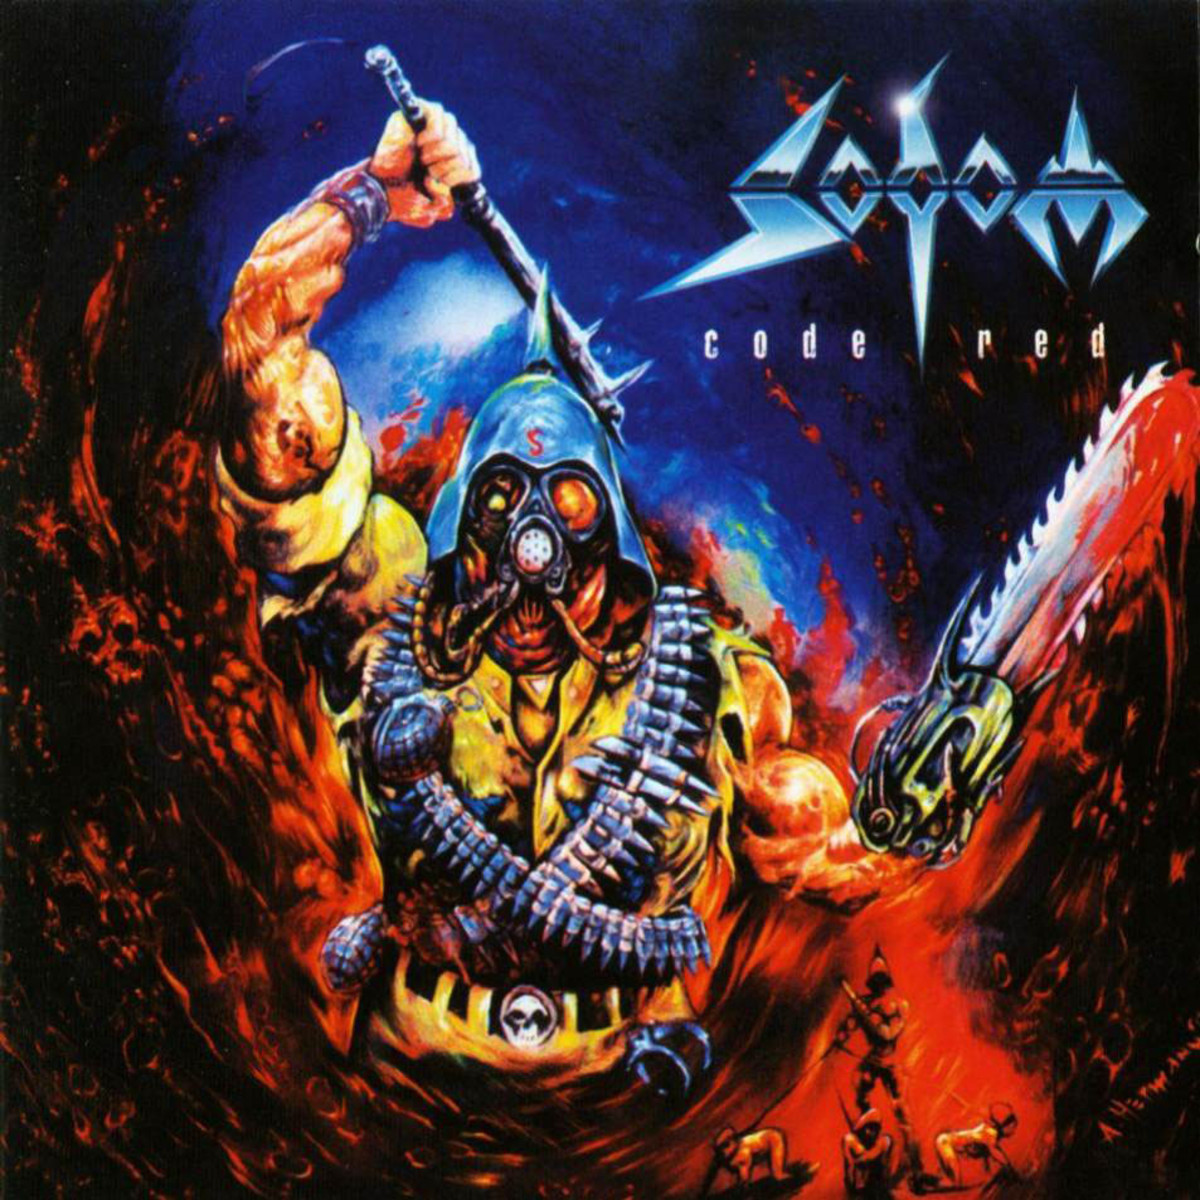 review-of-the-album-code-red-by-german-thrash-metal-band-sodom